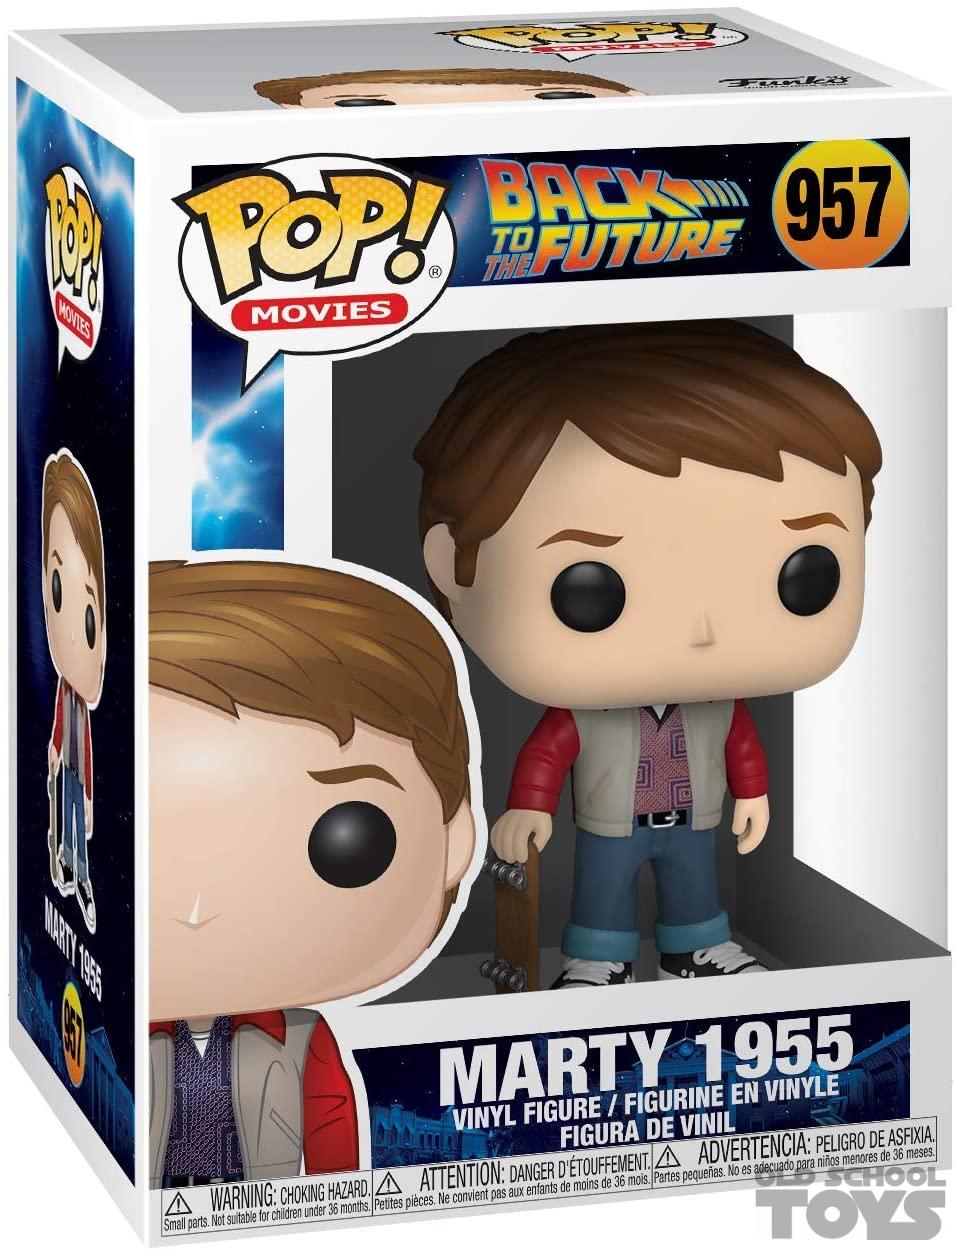 Marty 1955 (Back to the Future) Pop Vinyl Movies Series (Funko) Old School Toys